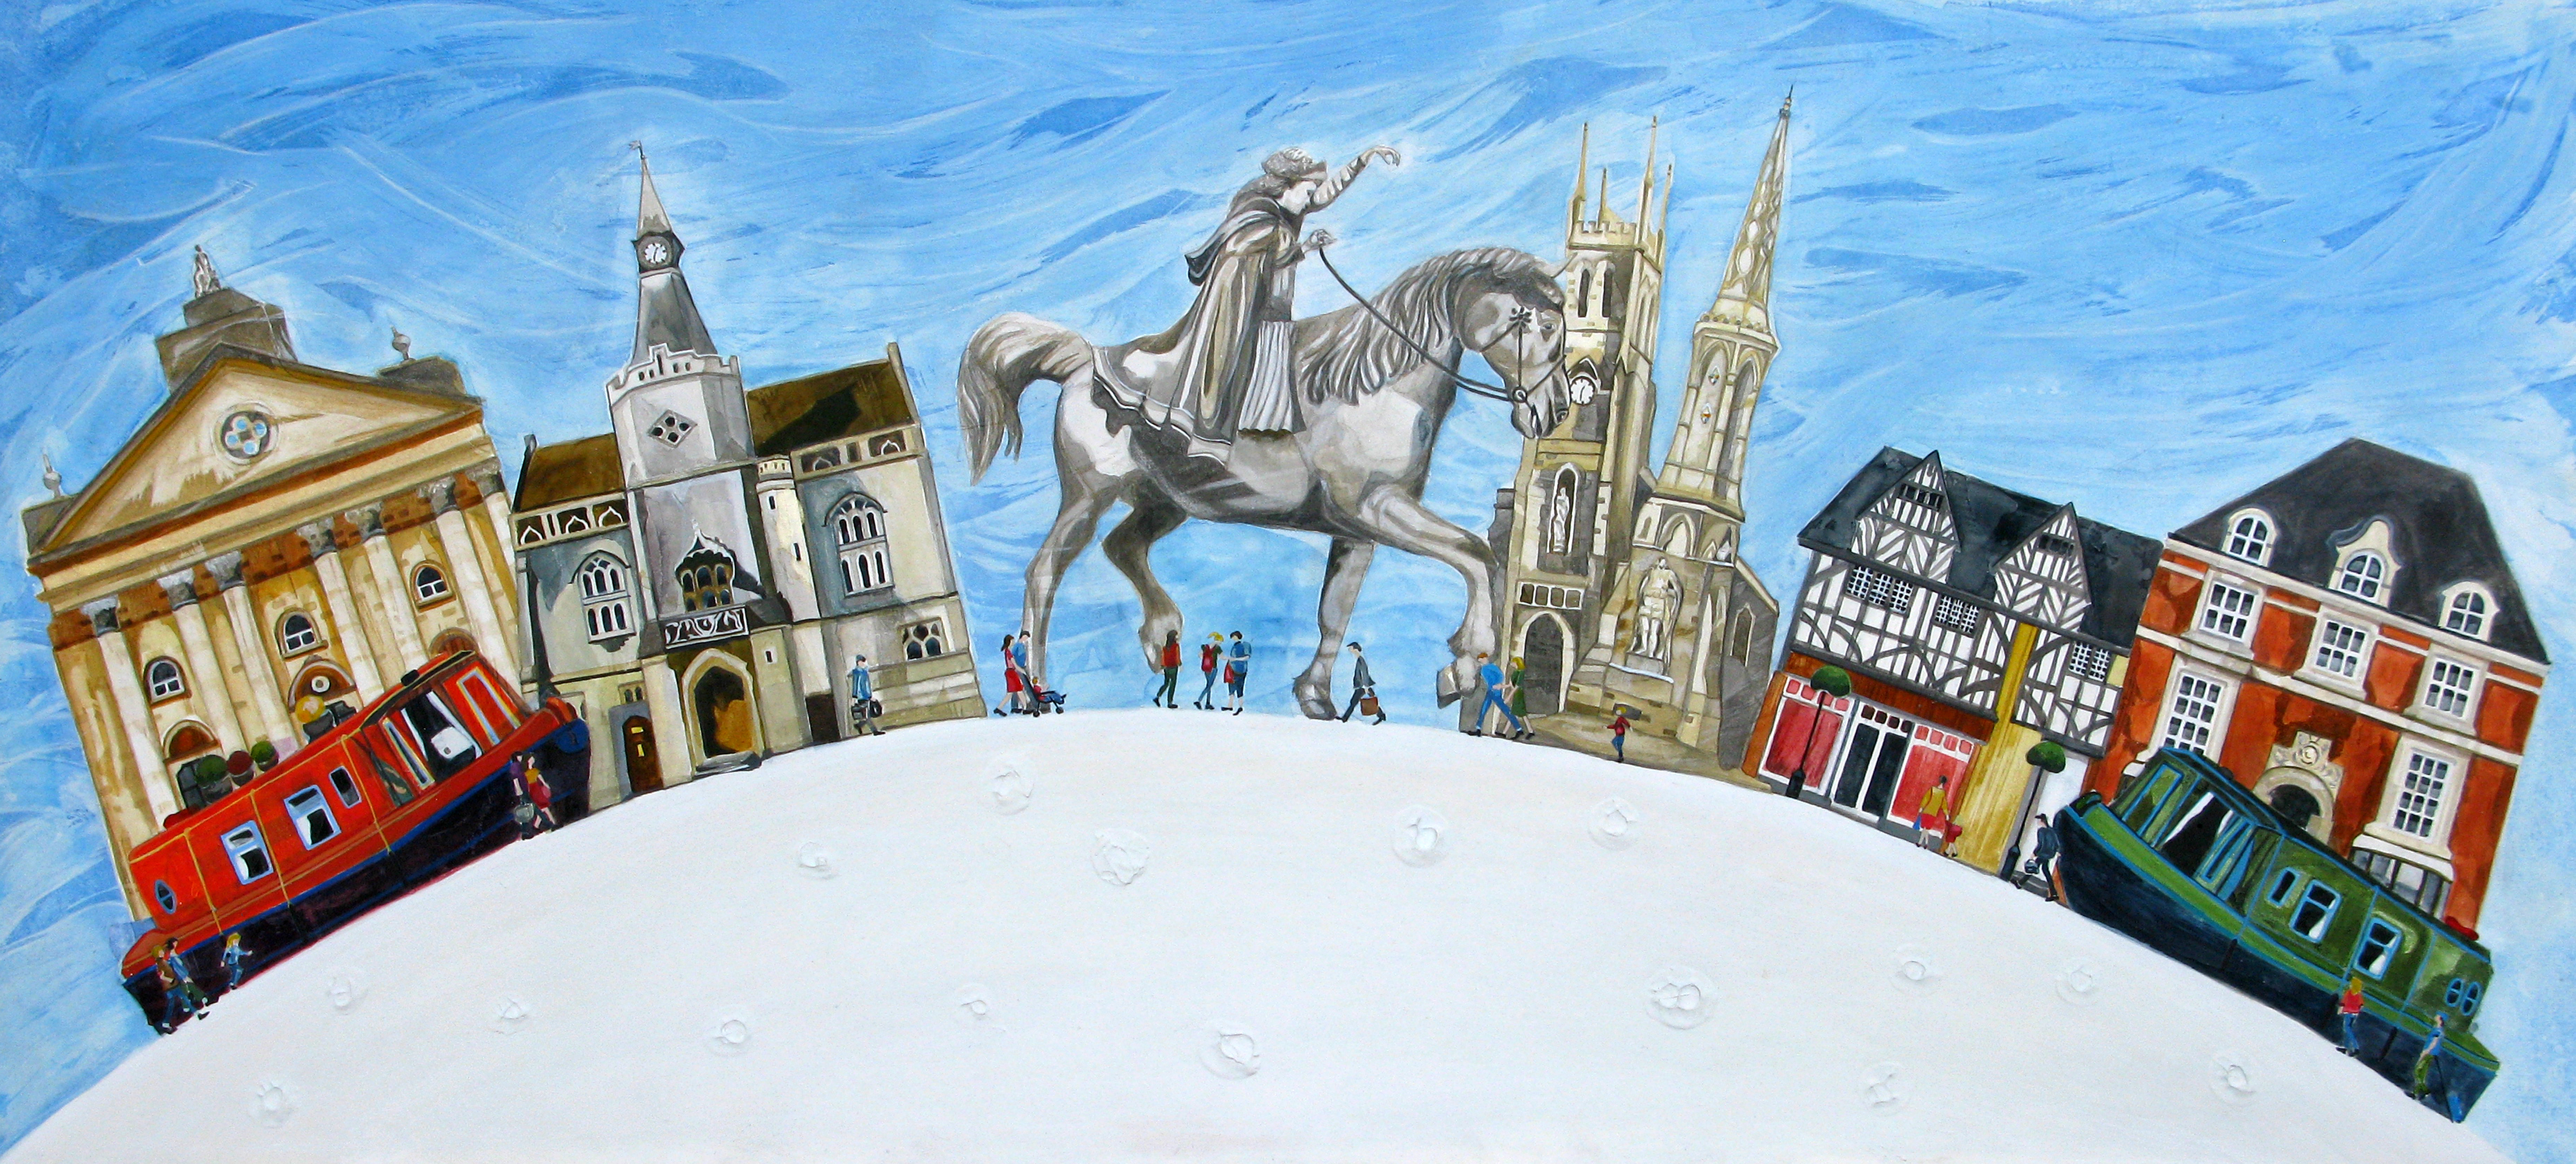 Over The Moon with Banbury. An Open Edition Print by Anya Simmons.